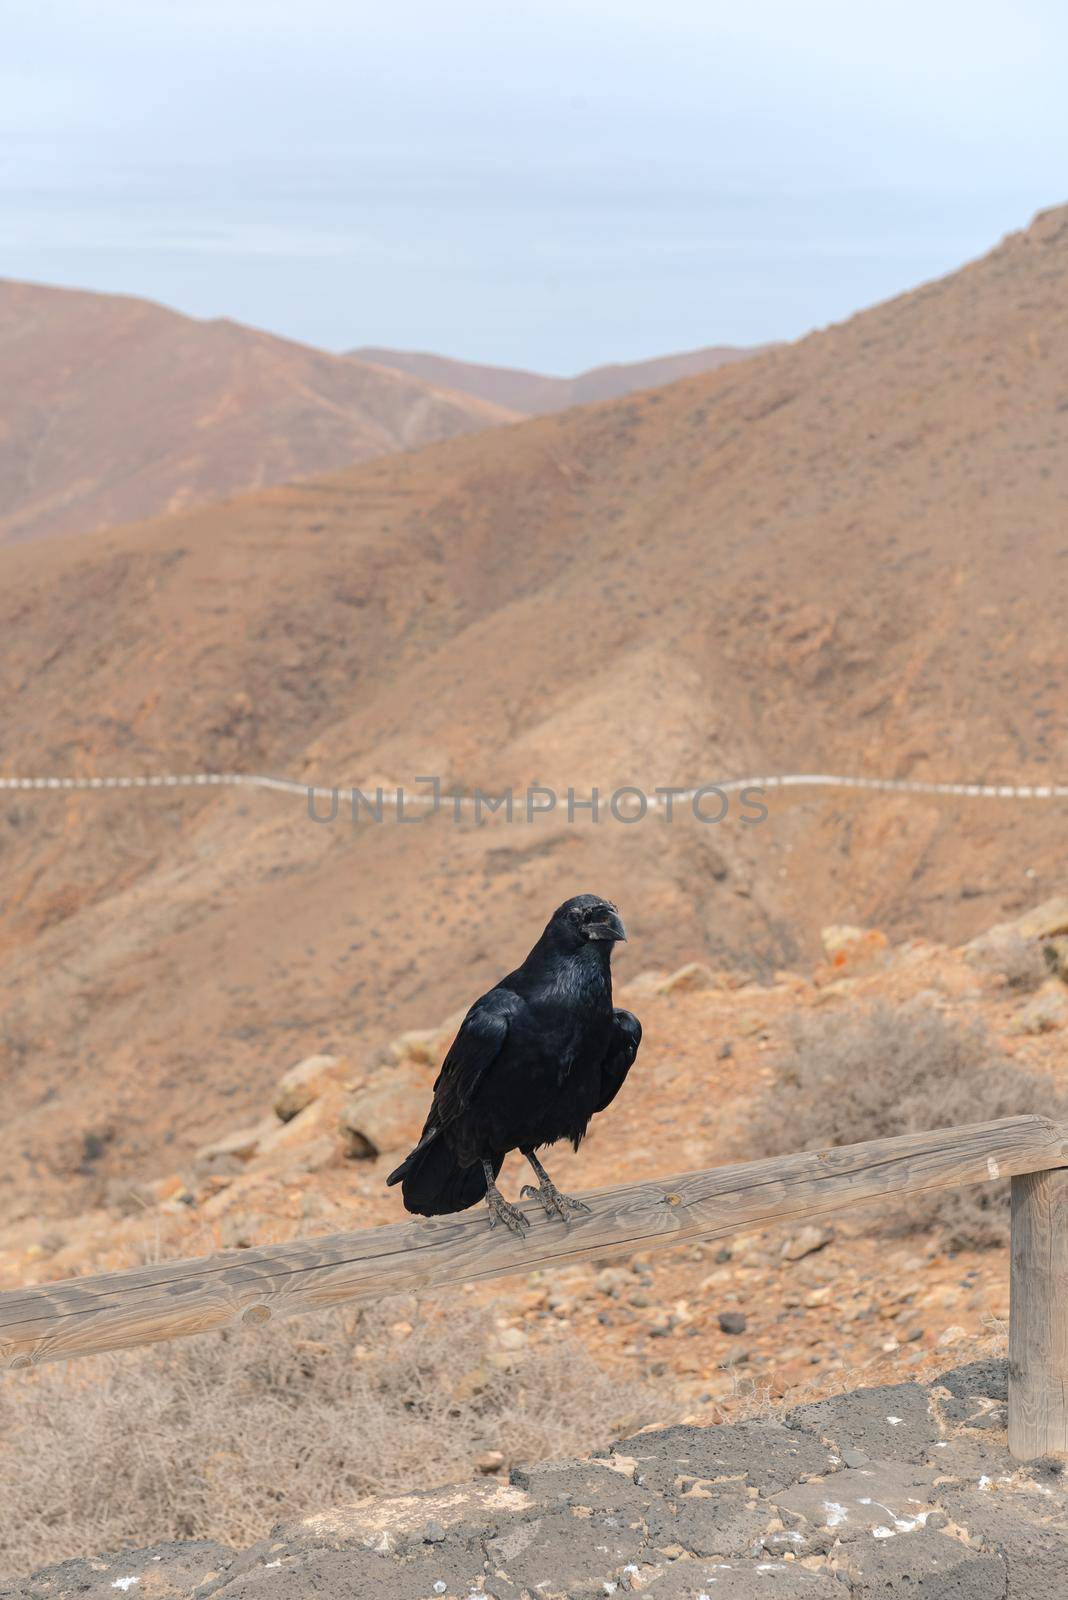 Crows on the Way from Bentacoria to Pajara on the island of Fuerteventura, Spain in summer 2020.